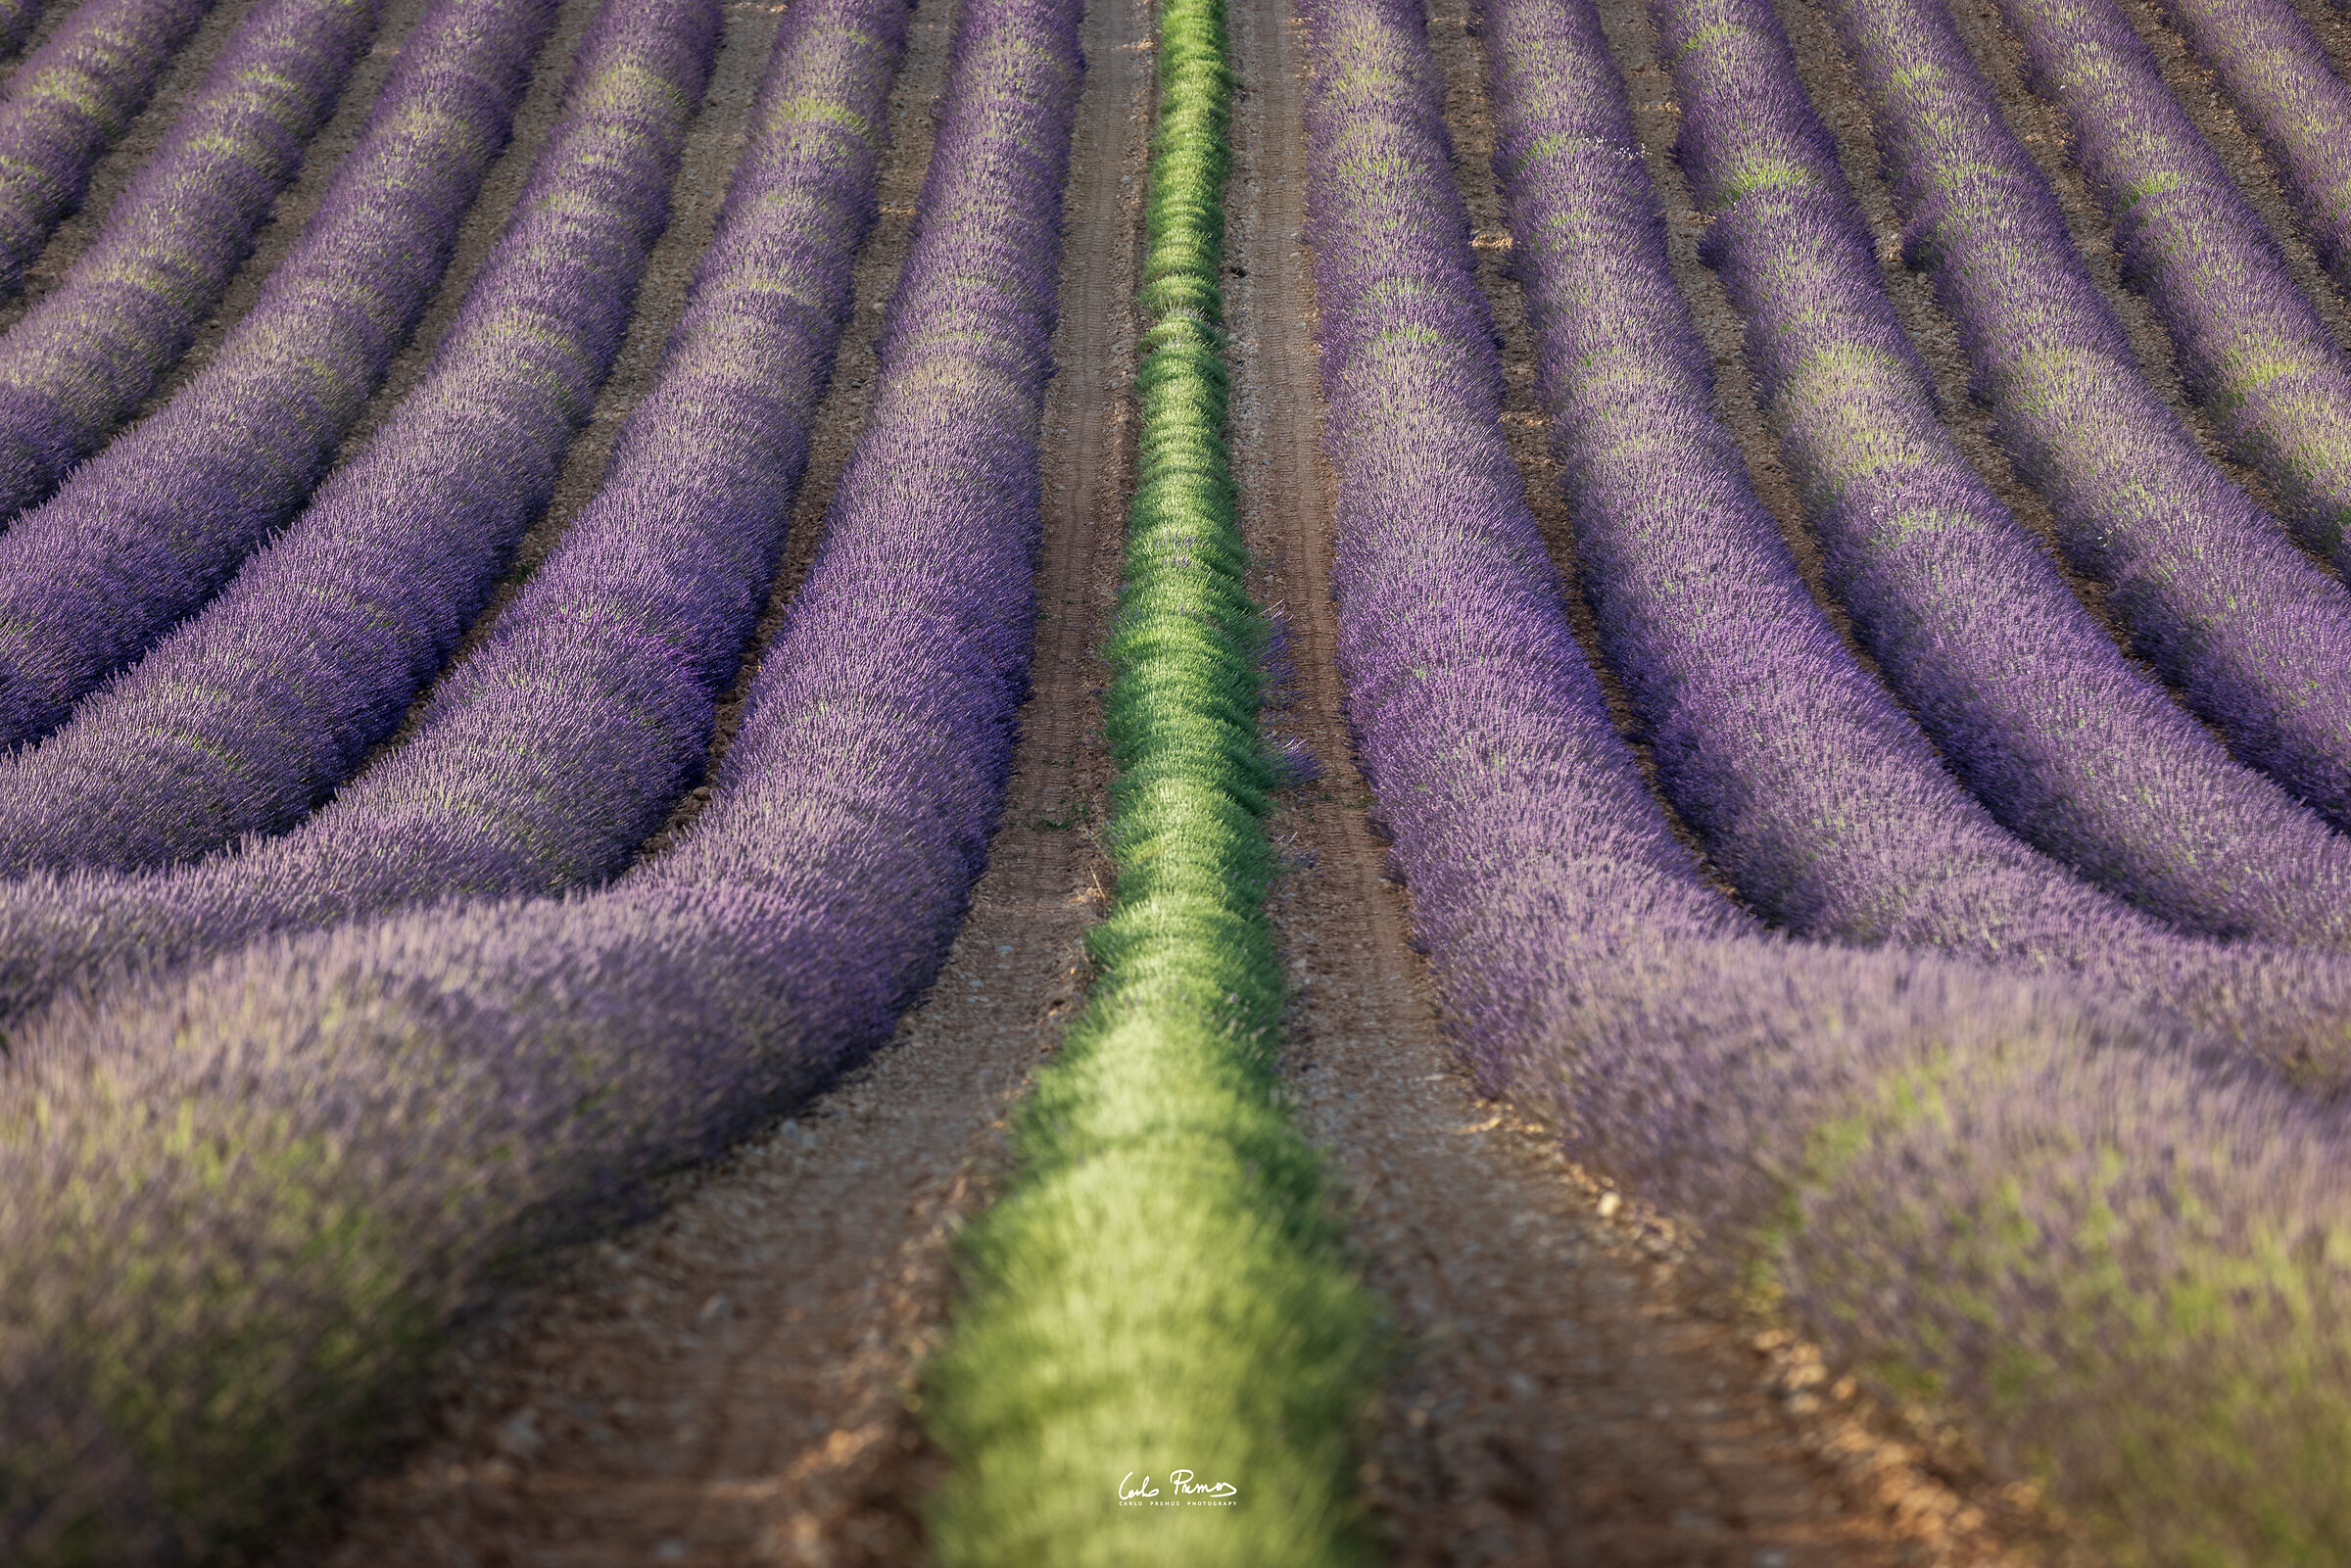 The first cut of lavender...